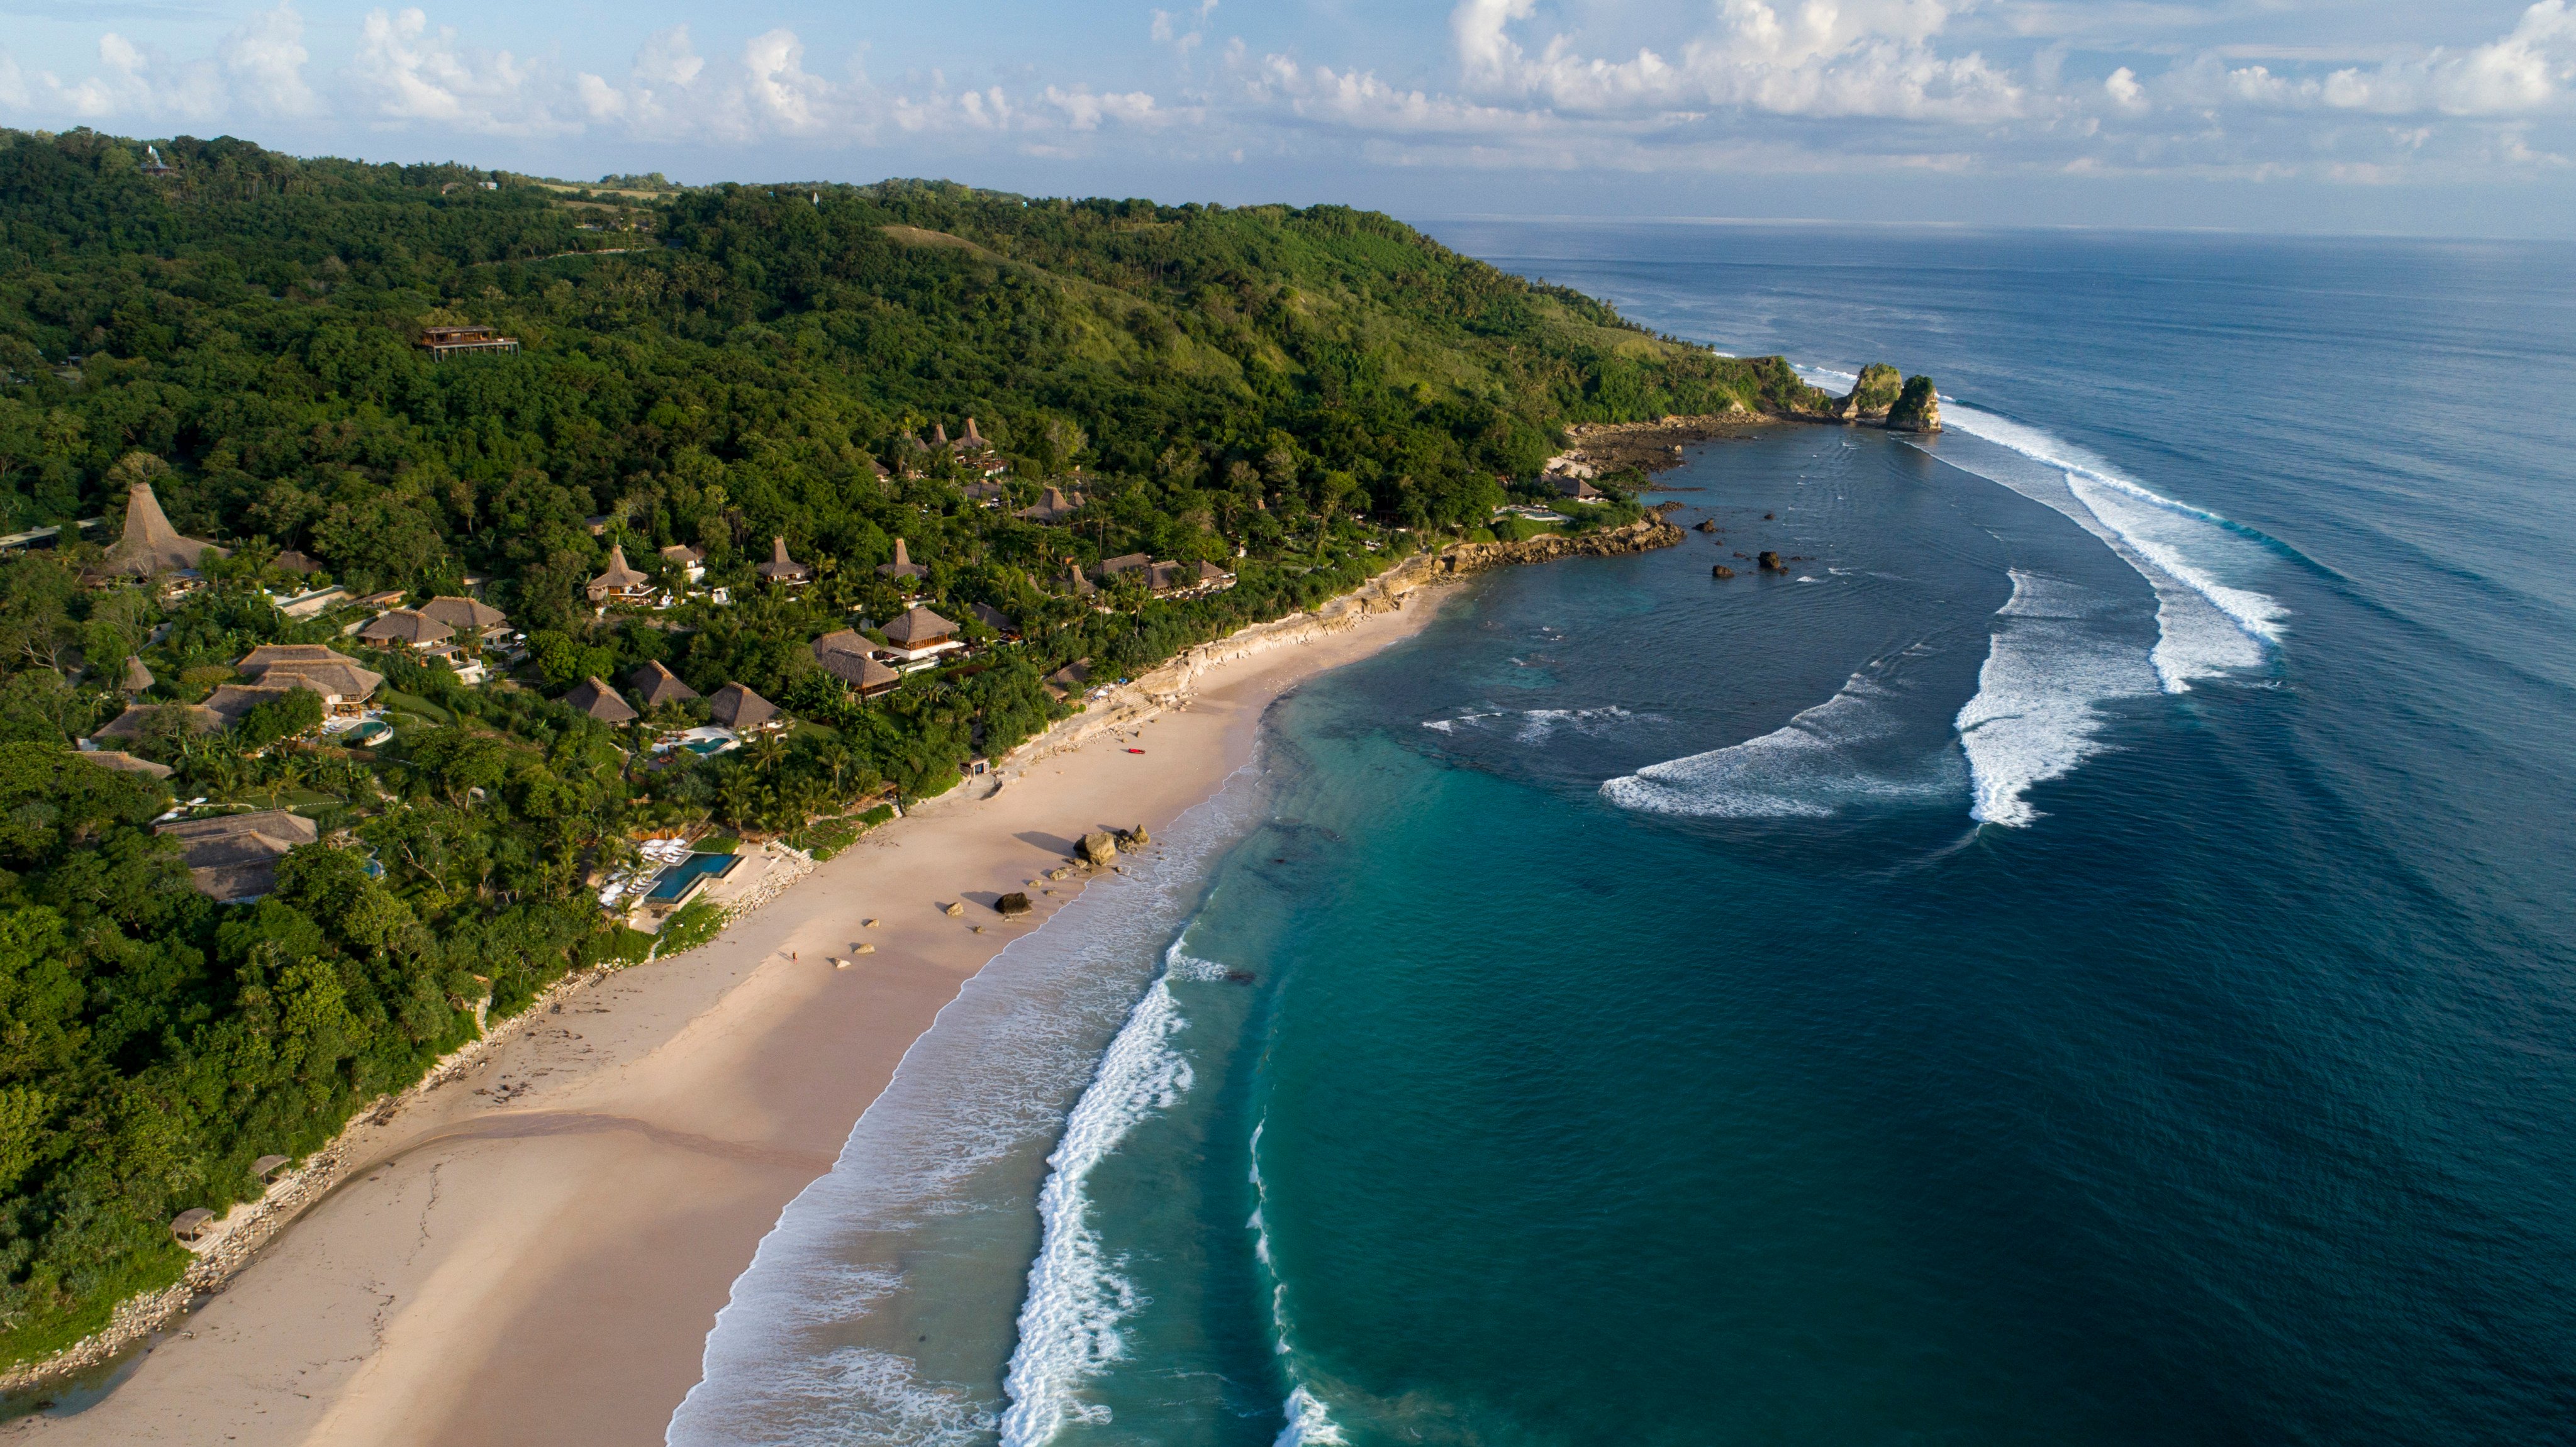 Nihi Sumba island is an award-winning resort on one of Indonesia’s less visited islands where an expereince of the people and culture of the island are central to the appeal, along with the seclusion and the surf. Photo by Jason Childs